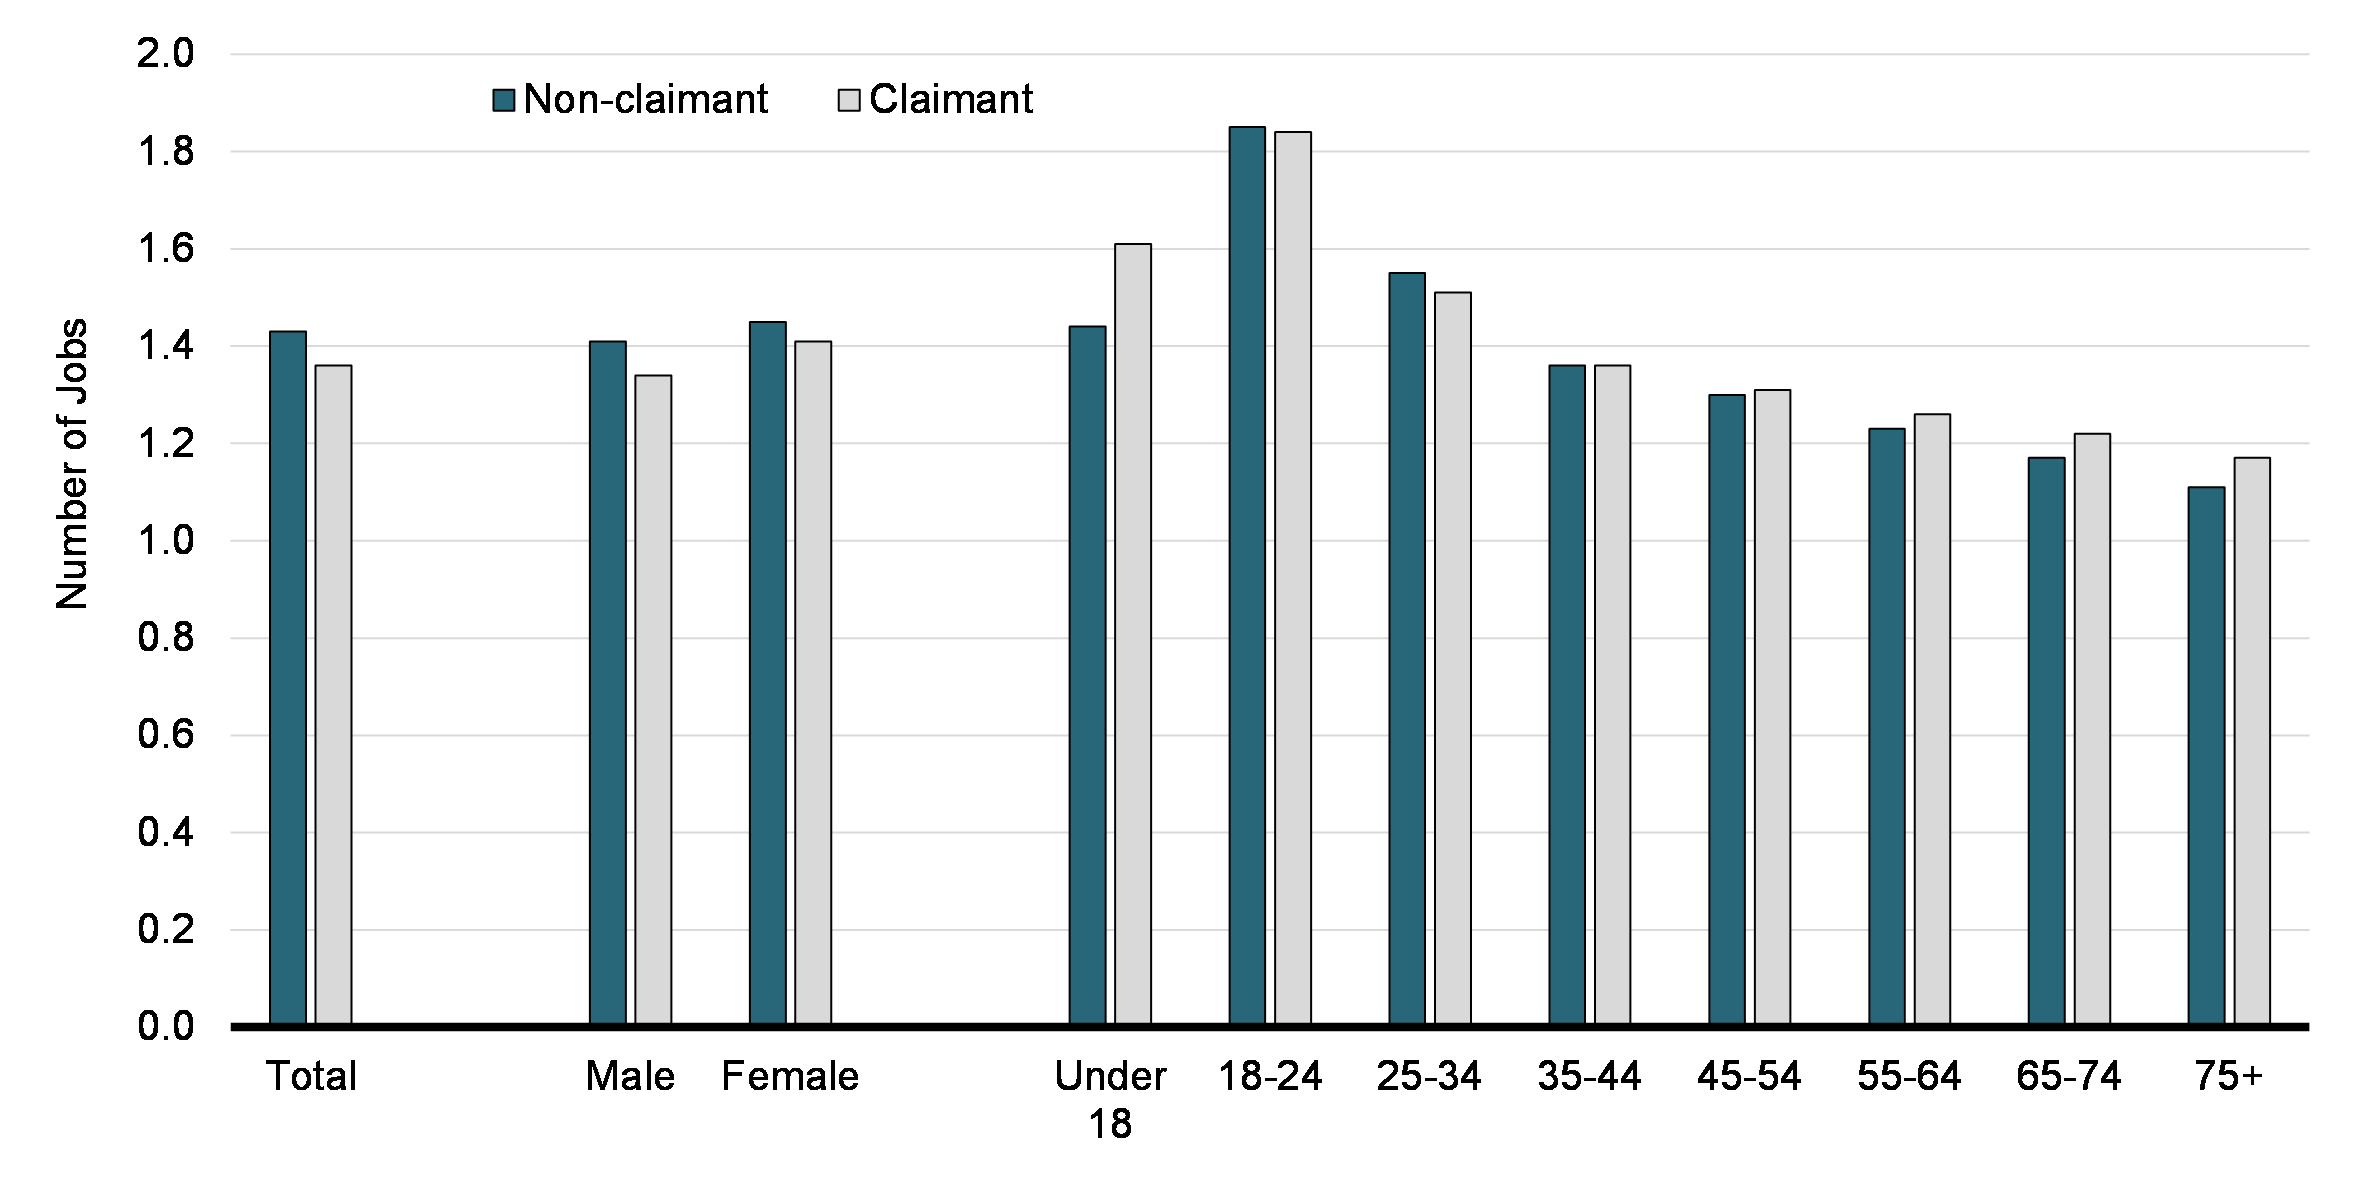  Chart 31: Average Number of Jobs Worked by OEE Claimants and Non-Claimants, by Gender and Age (2019)
